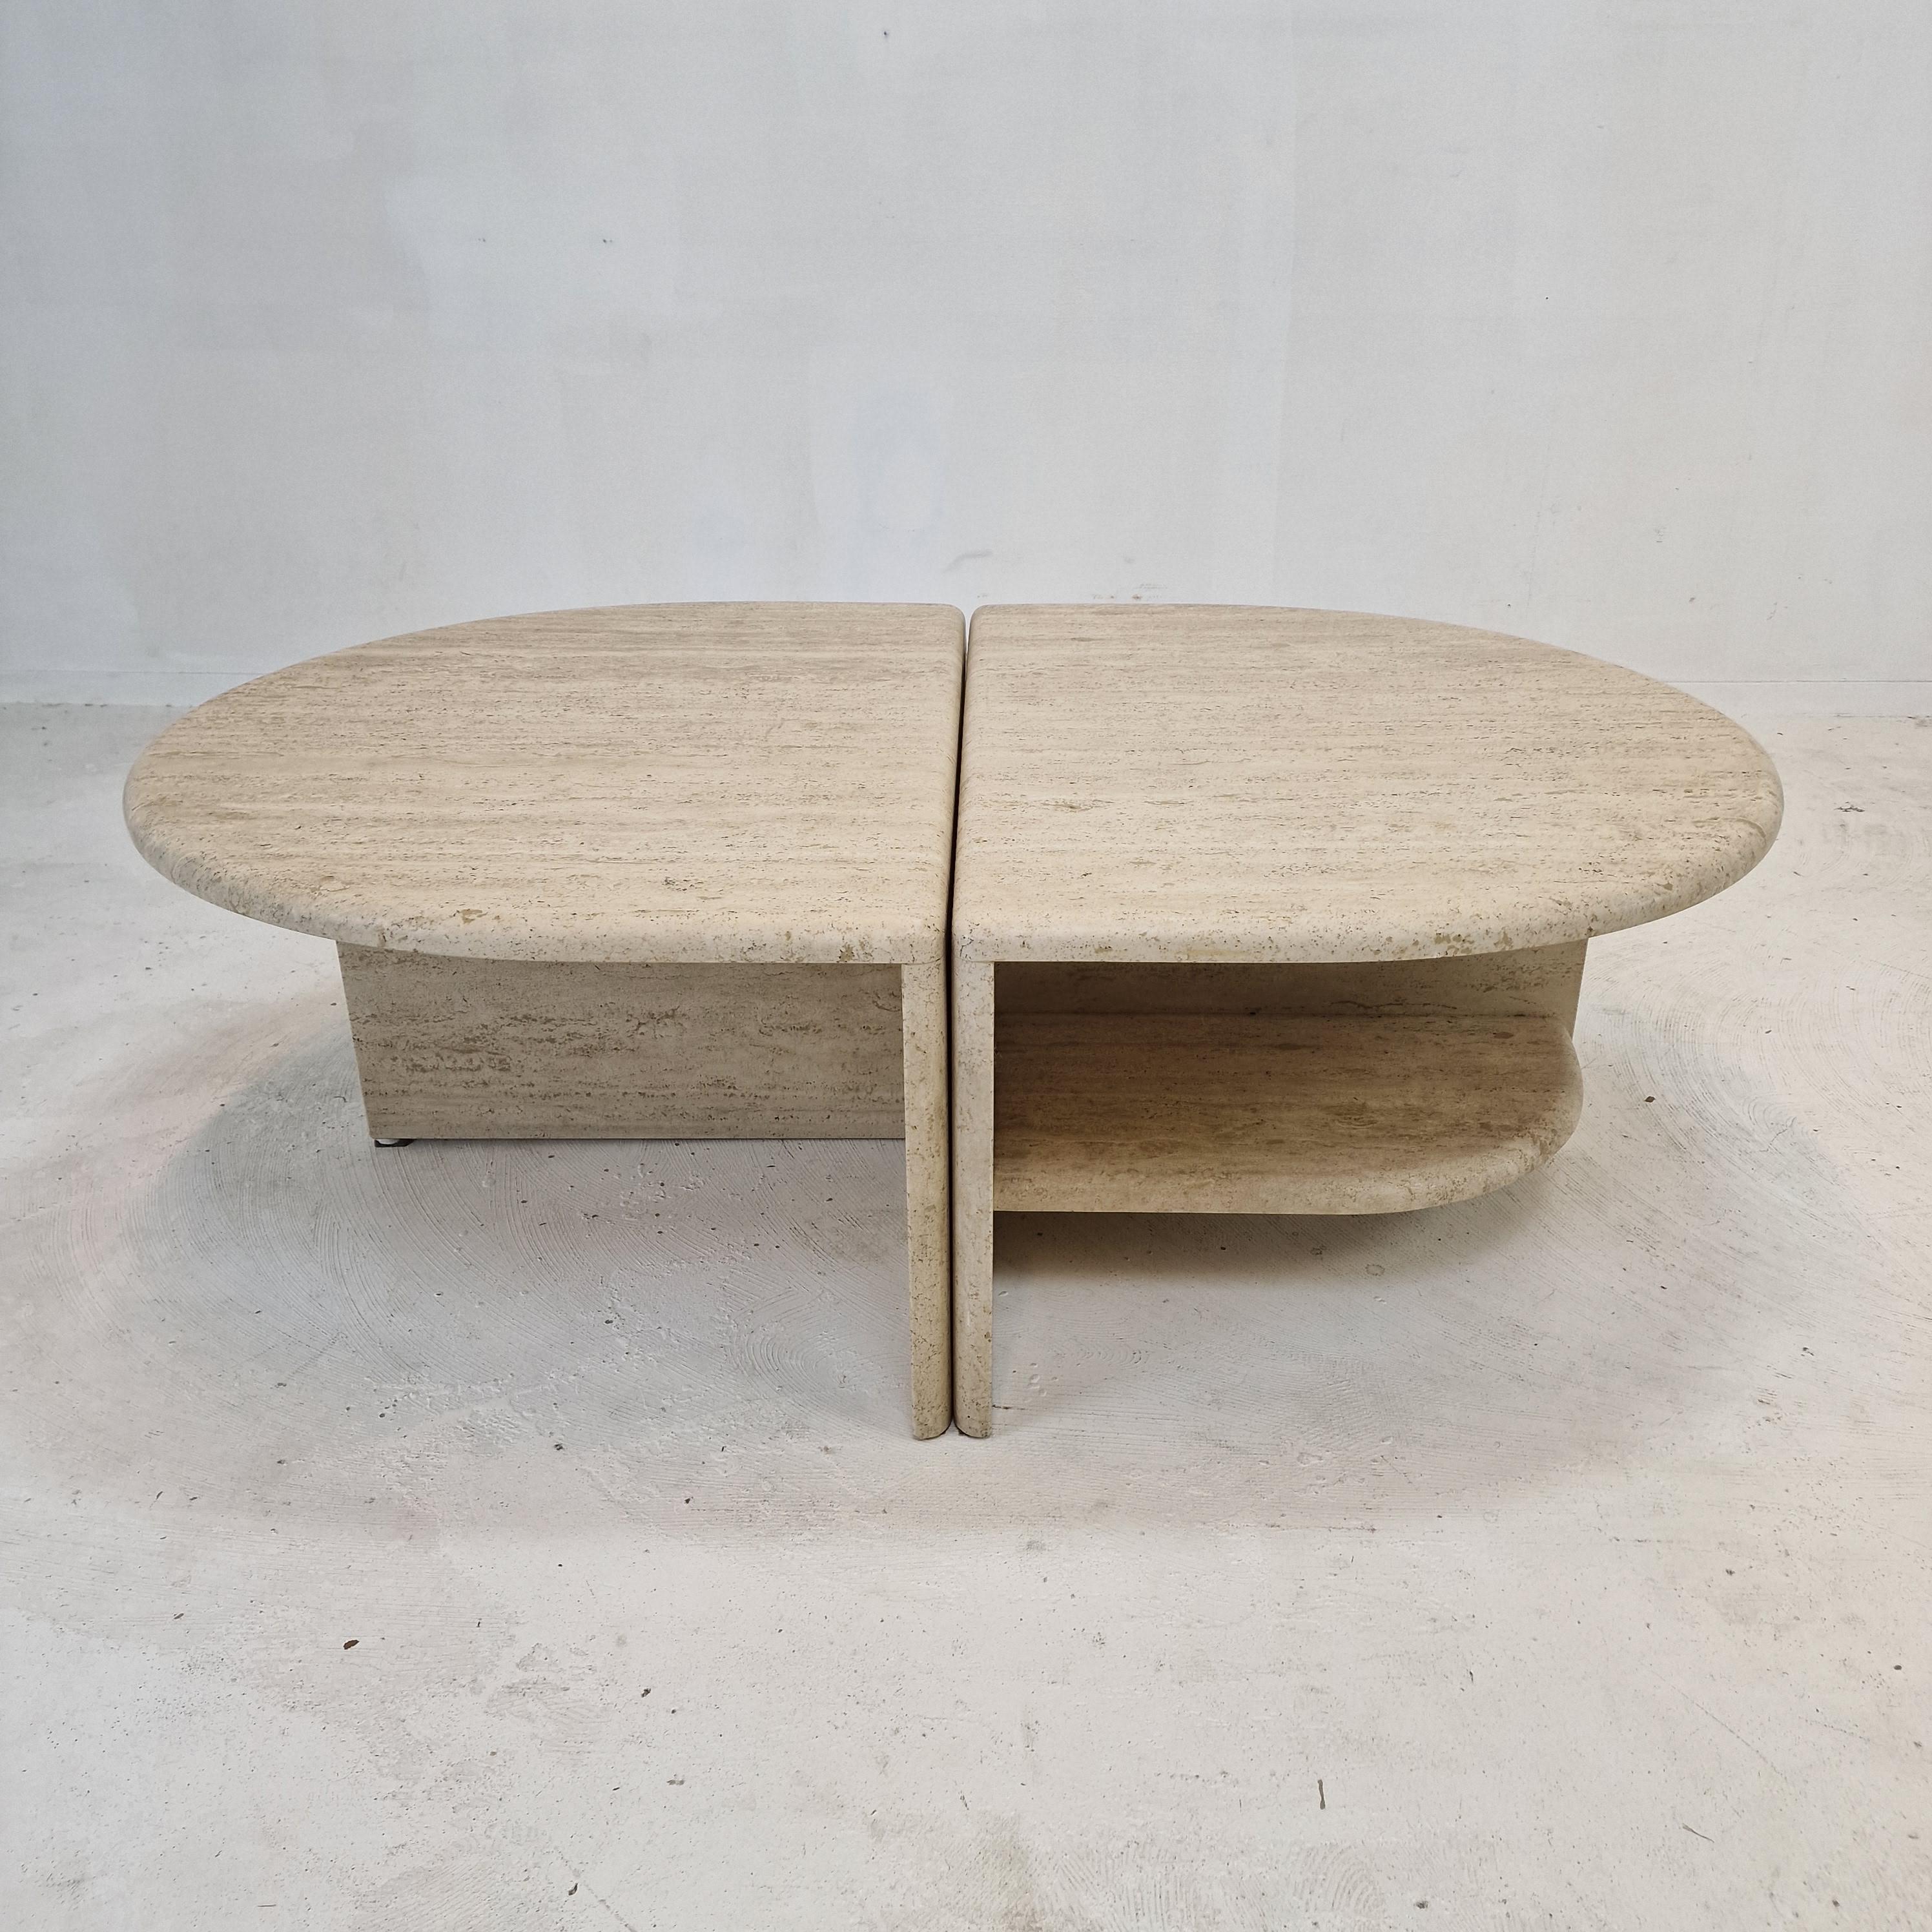 Very nice set of 2 Italian coffee tables handcrafted out of travertine.

The oval shaped top is rounded on the edge. 
It is made of beautiful travertine.
Please take notice of the very nice patterns. 

It has the normal traces of use, see the